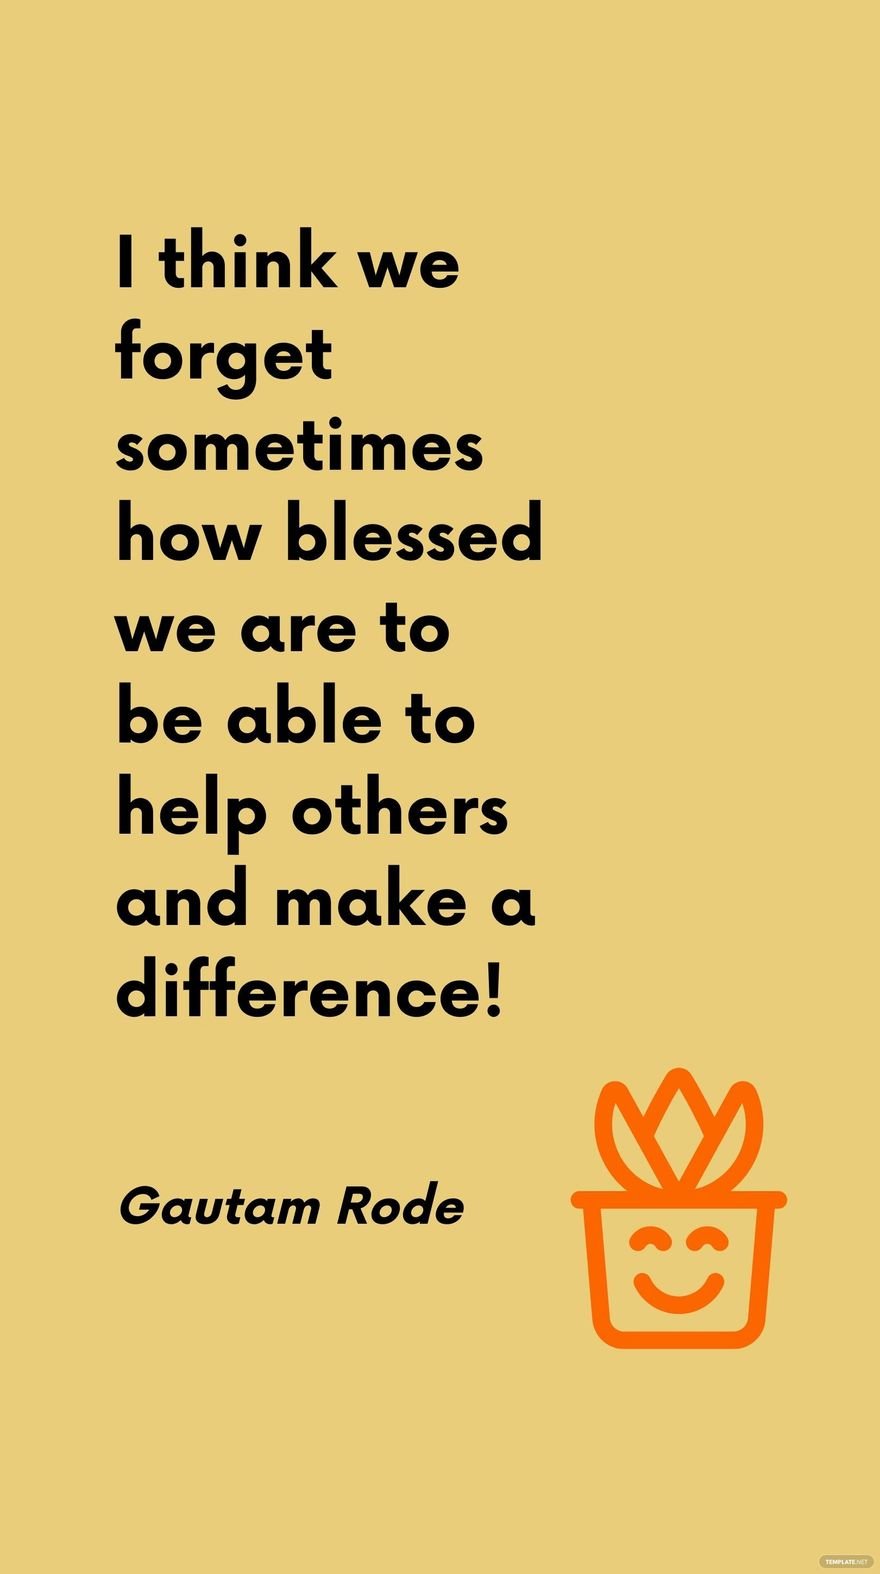 Gautam Rode - I think we forget sometimes how blessed we are to be able to help others and make a difference!